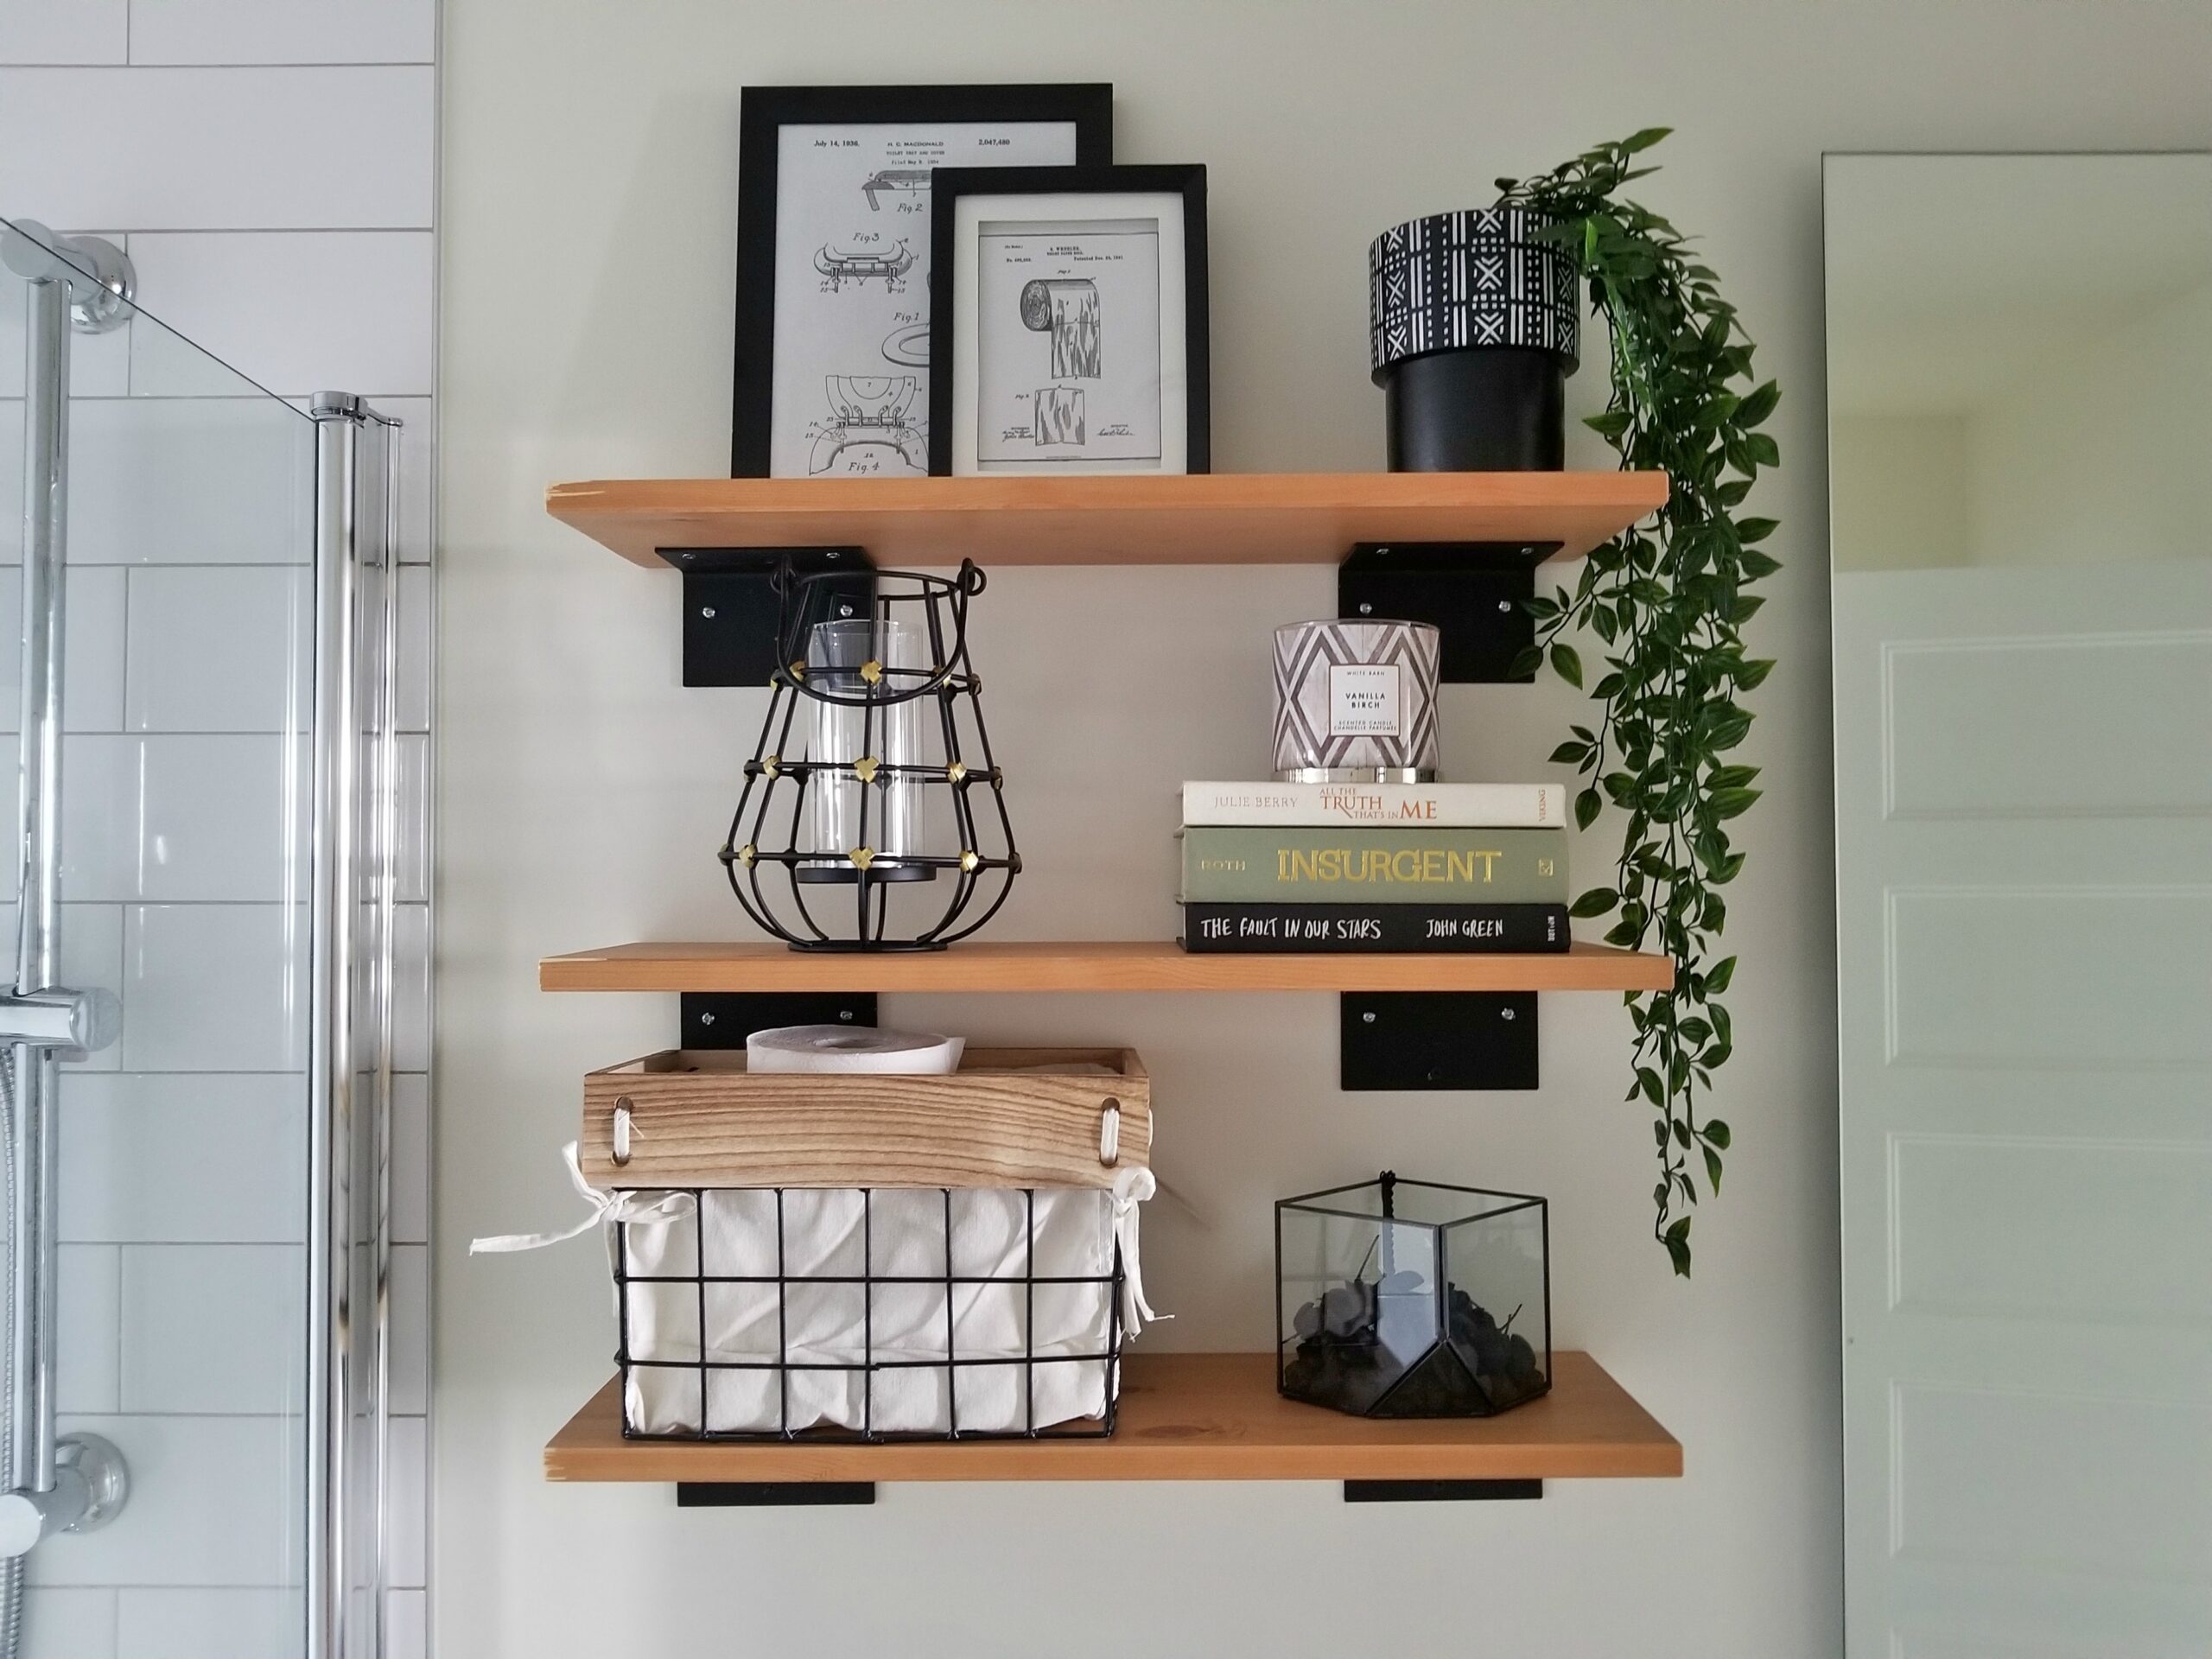 Ikea Wall Shelves How To Hang, How To Install Floating Shelves With Drywall Anchors